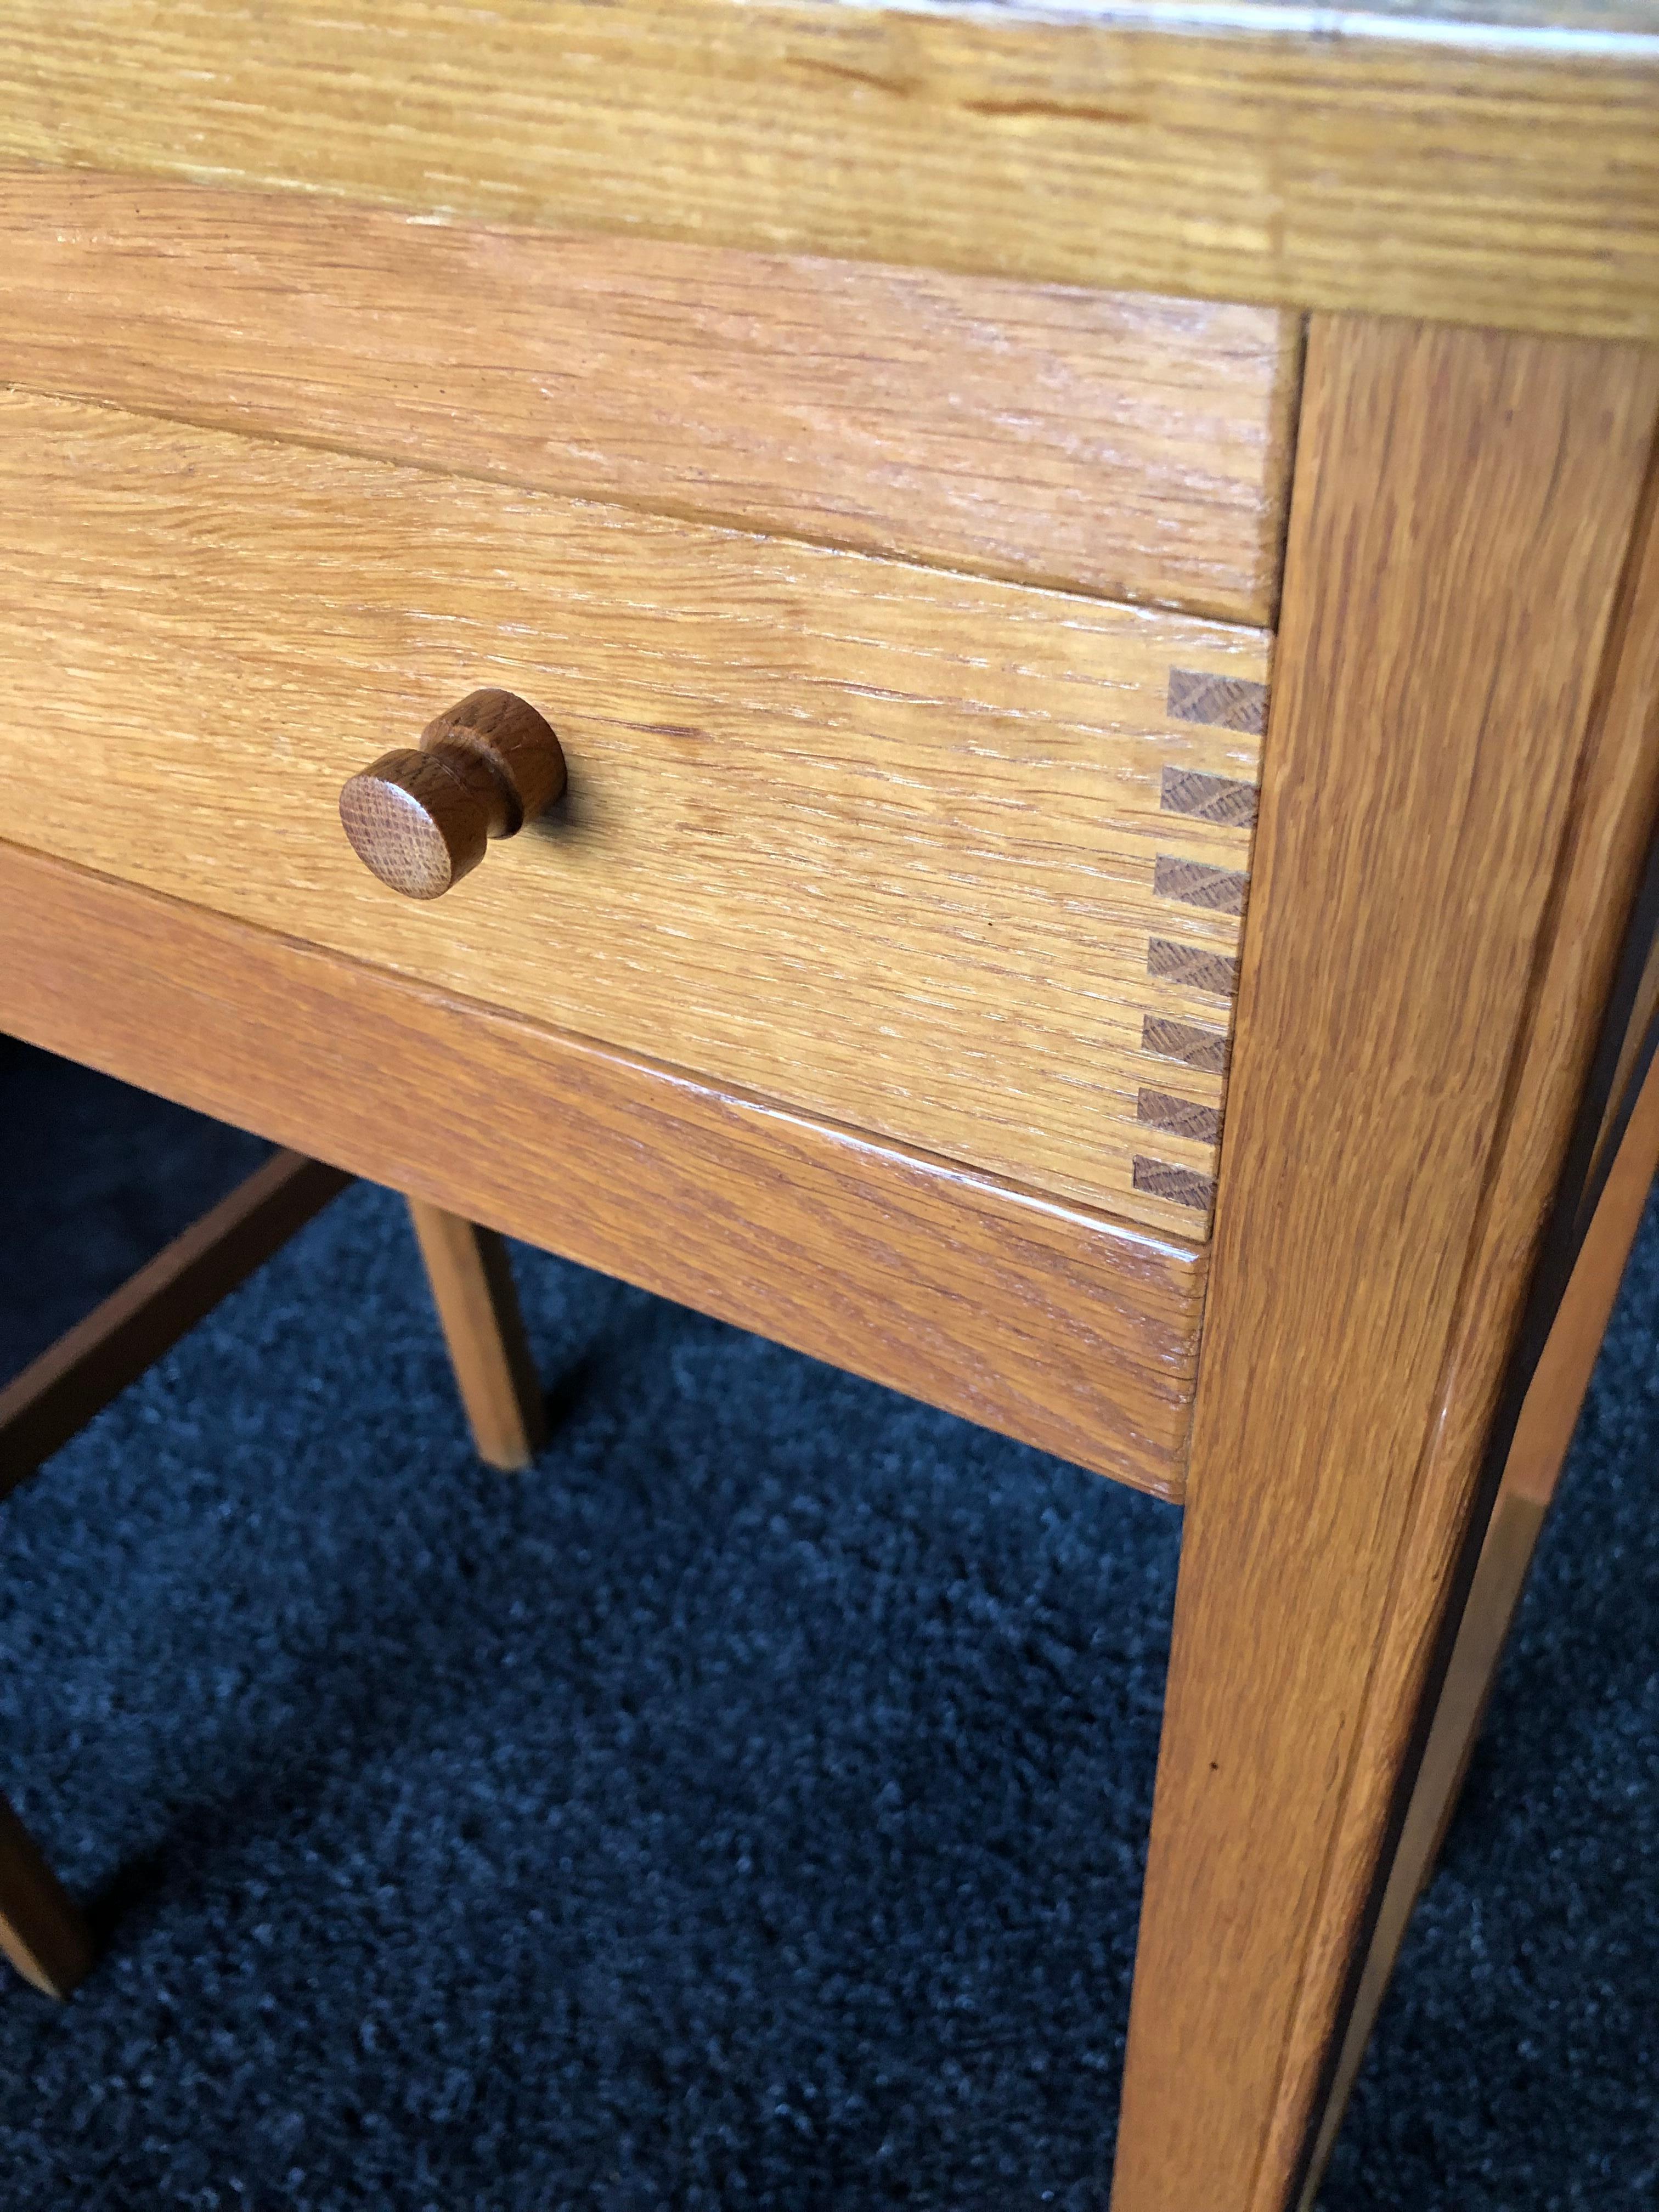 A wonderful Danish oak standing ‘lectern’ writing desk. Lovely craftsmanship that you might expect from an Andreas Hansen - Hadsten piece. This would suit a restaurant reception situation for greeting guests or similar scenario. Or, as originally